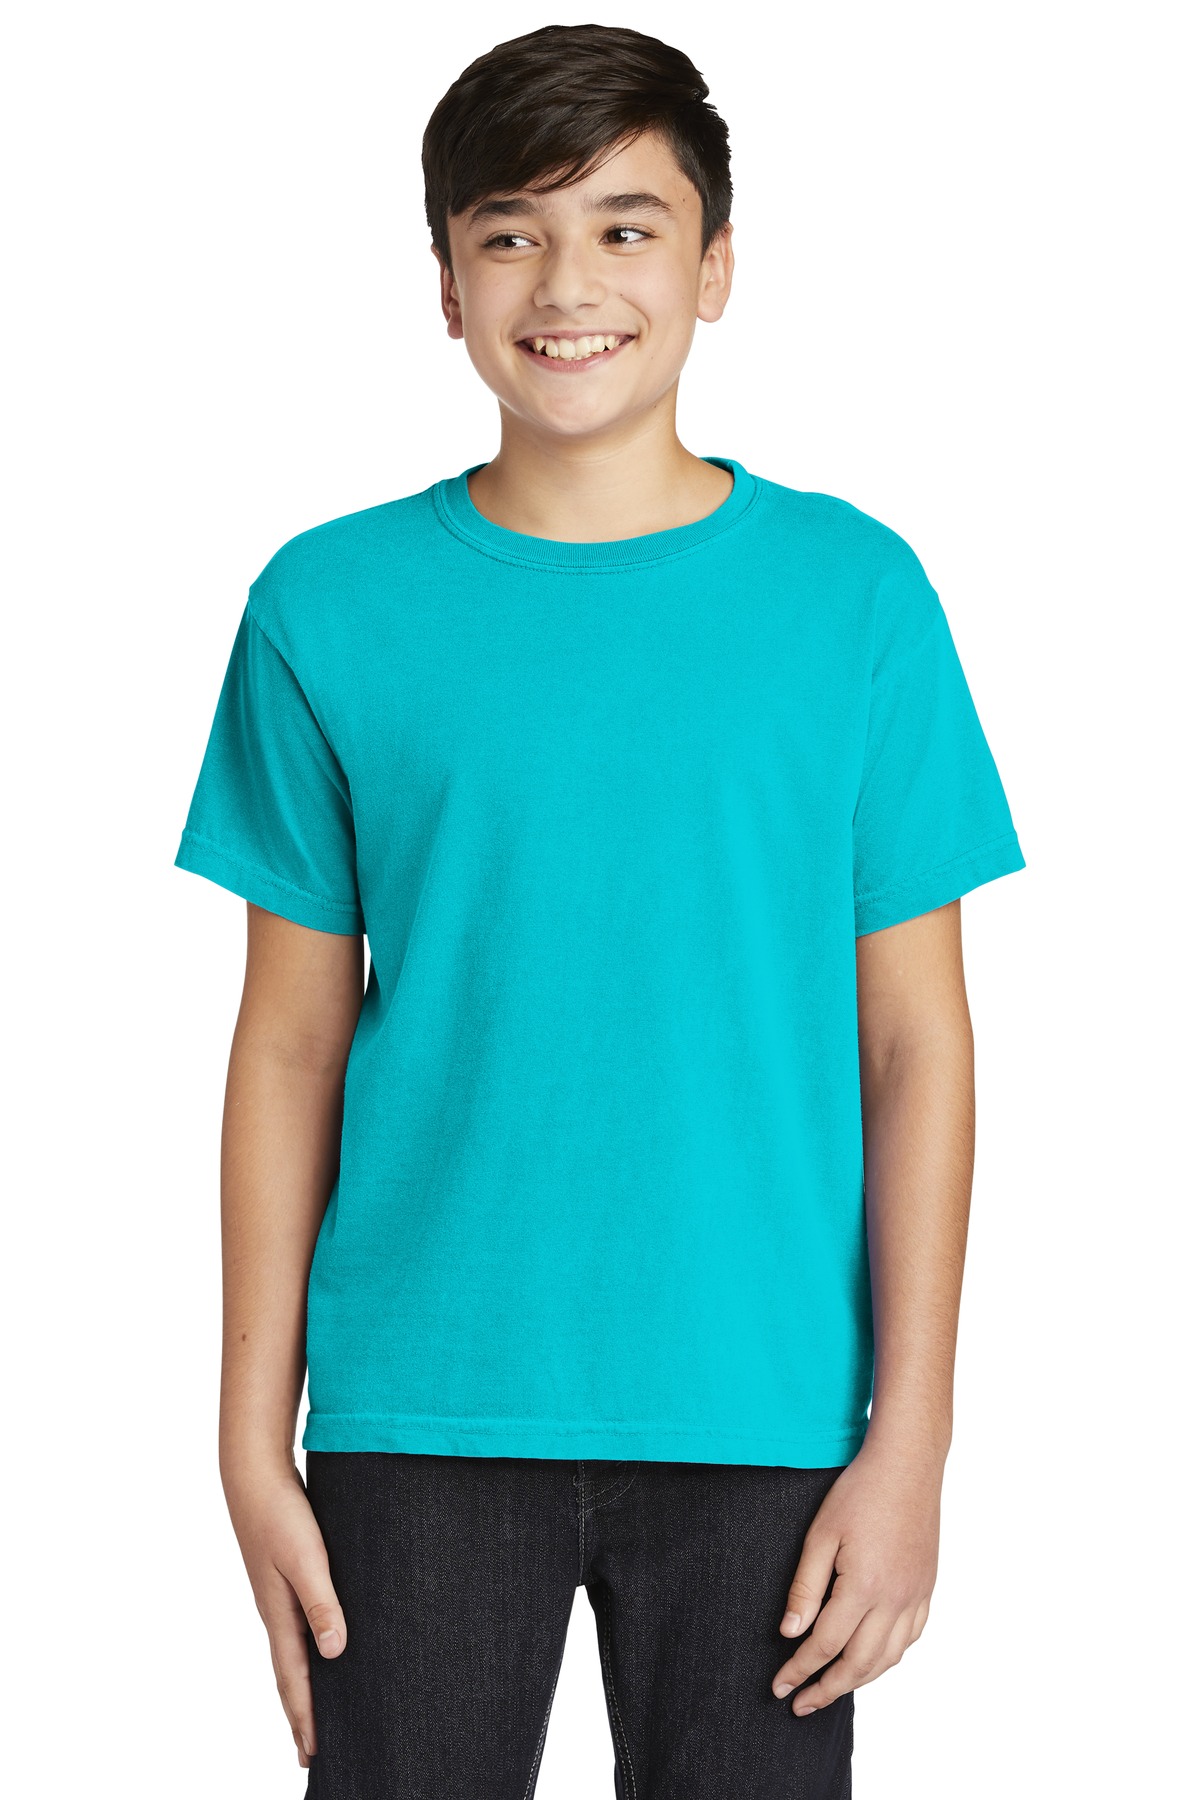 COMFORT COLORS Youth Heavyweight Ring Spun Tee-Comfort Colors